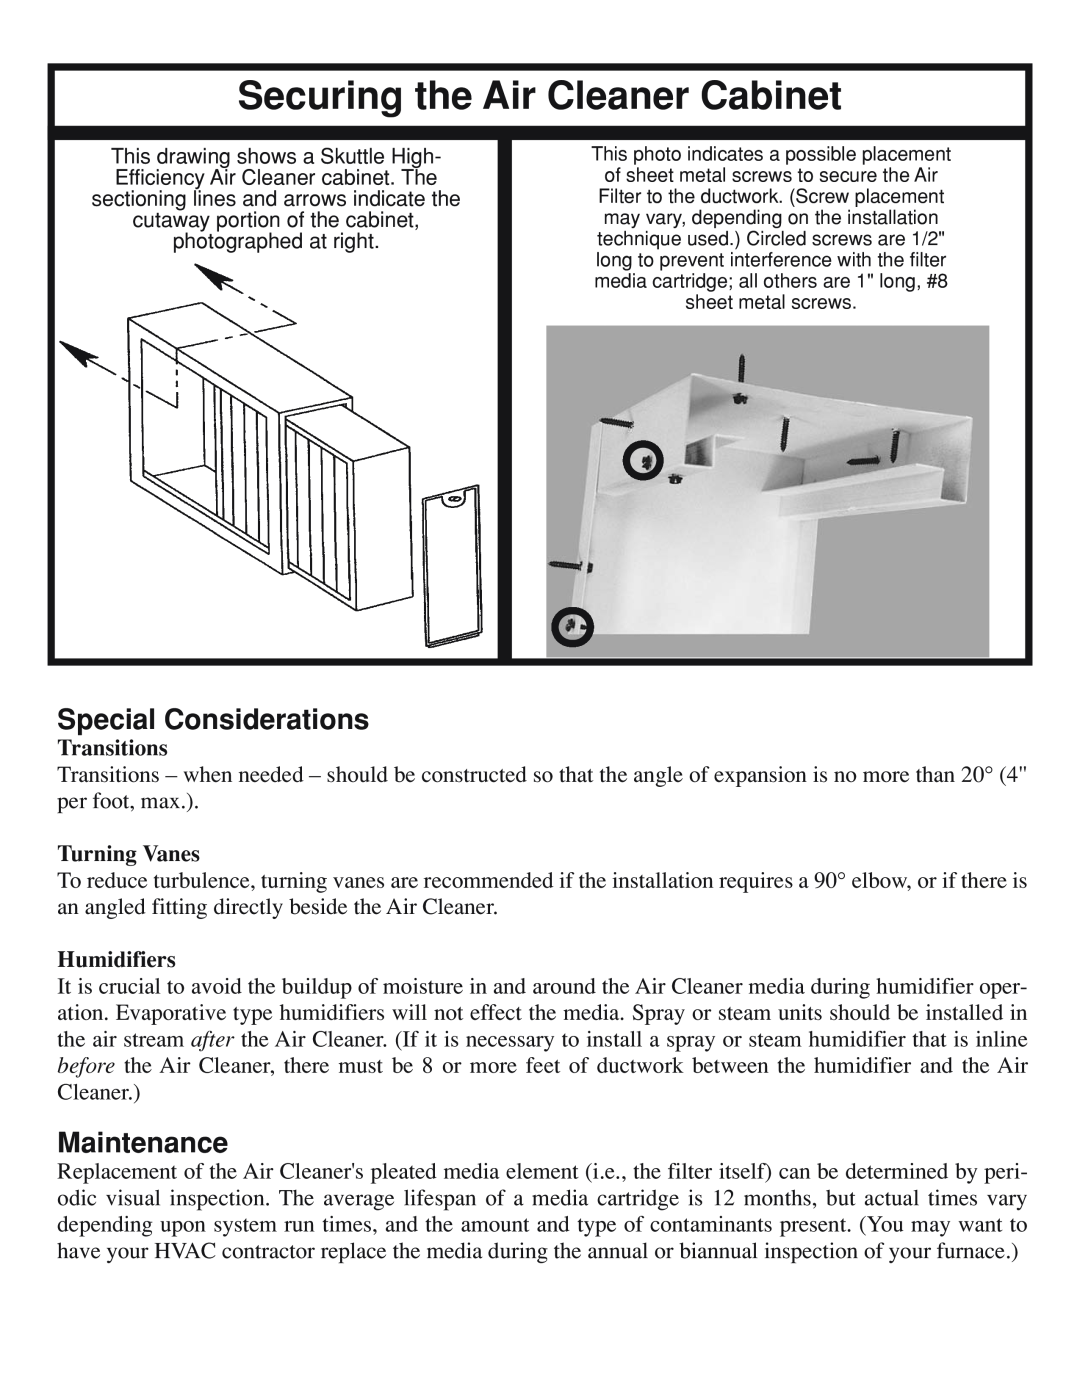 Skuttle Indoor Air Quality Products Special Considerations, Maintenance, Securing the Air Cleaner Cabinet, Transitions 